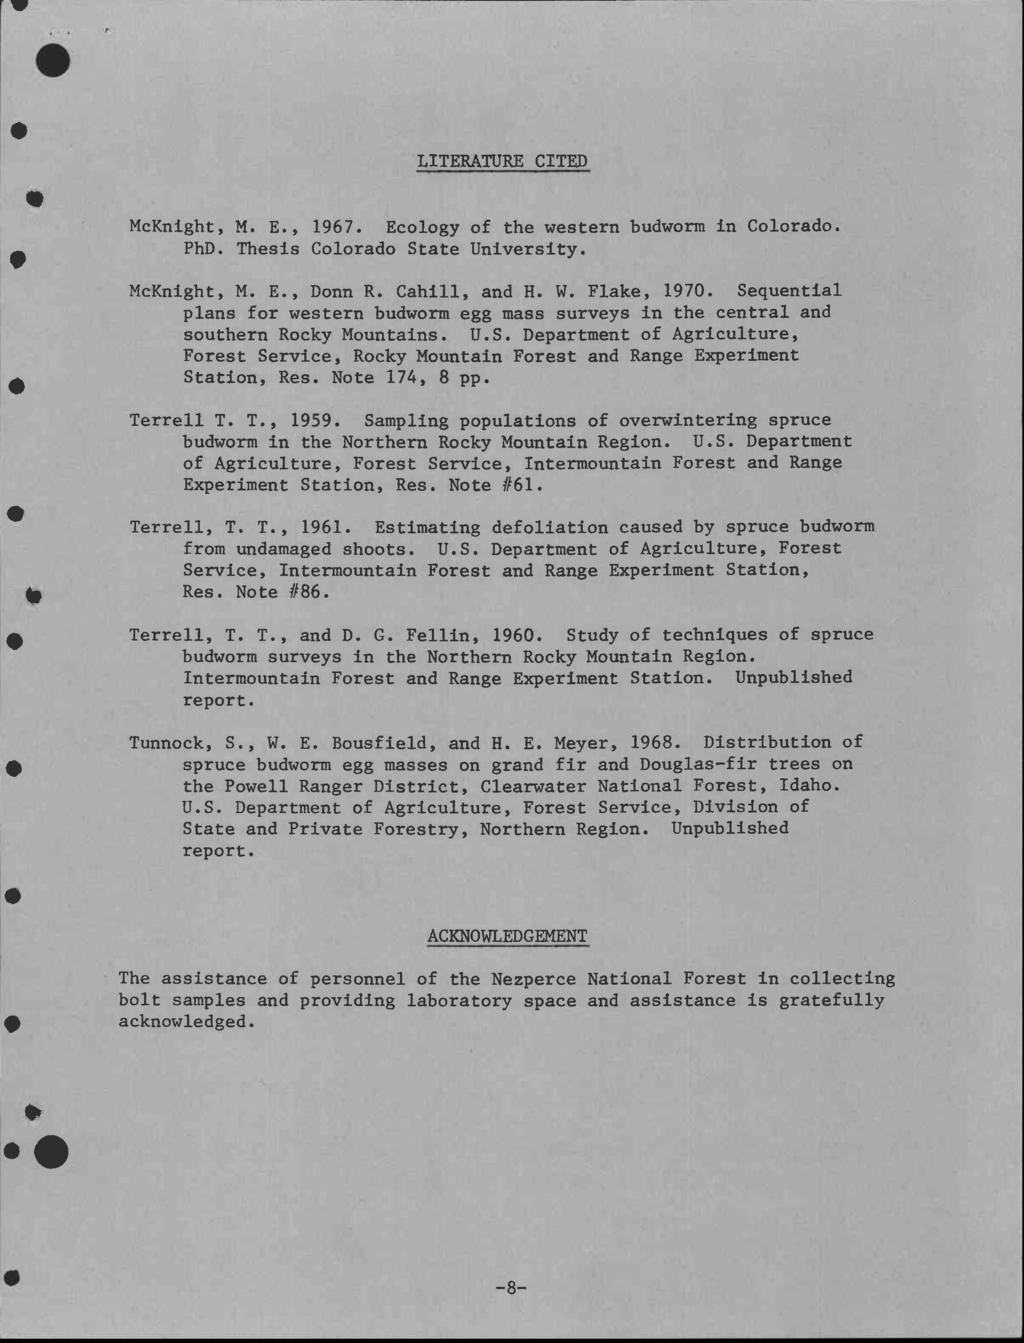 I 41) lb LITERATURE CITED McKnight, M. E., 1967. Ecology of the western budworm in Colorado. PhD. Thesis Colorado State University. McKnight, M. E., Donn R. Cahill, and H. W. Flake, 1970.